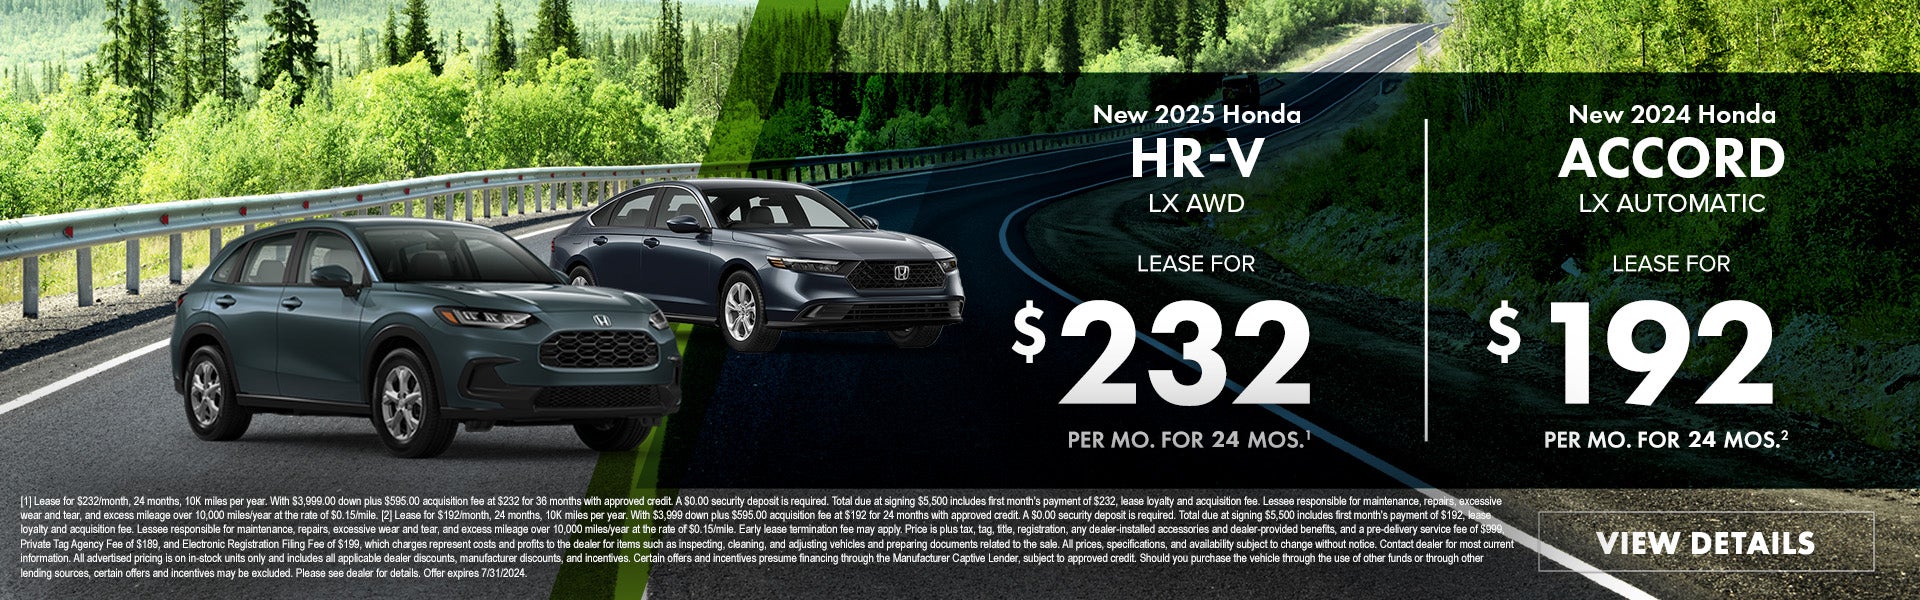 July Specials - HR-V/Accord Lease